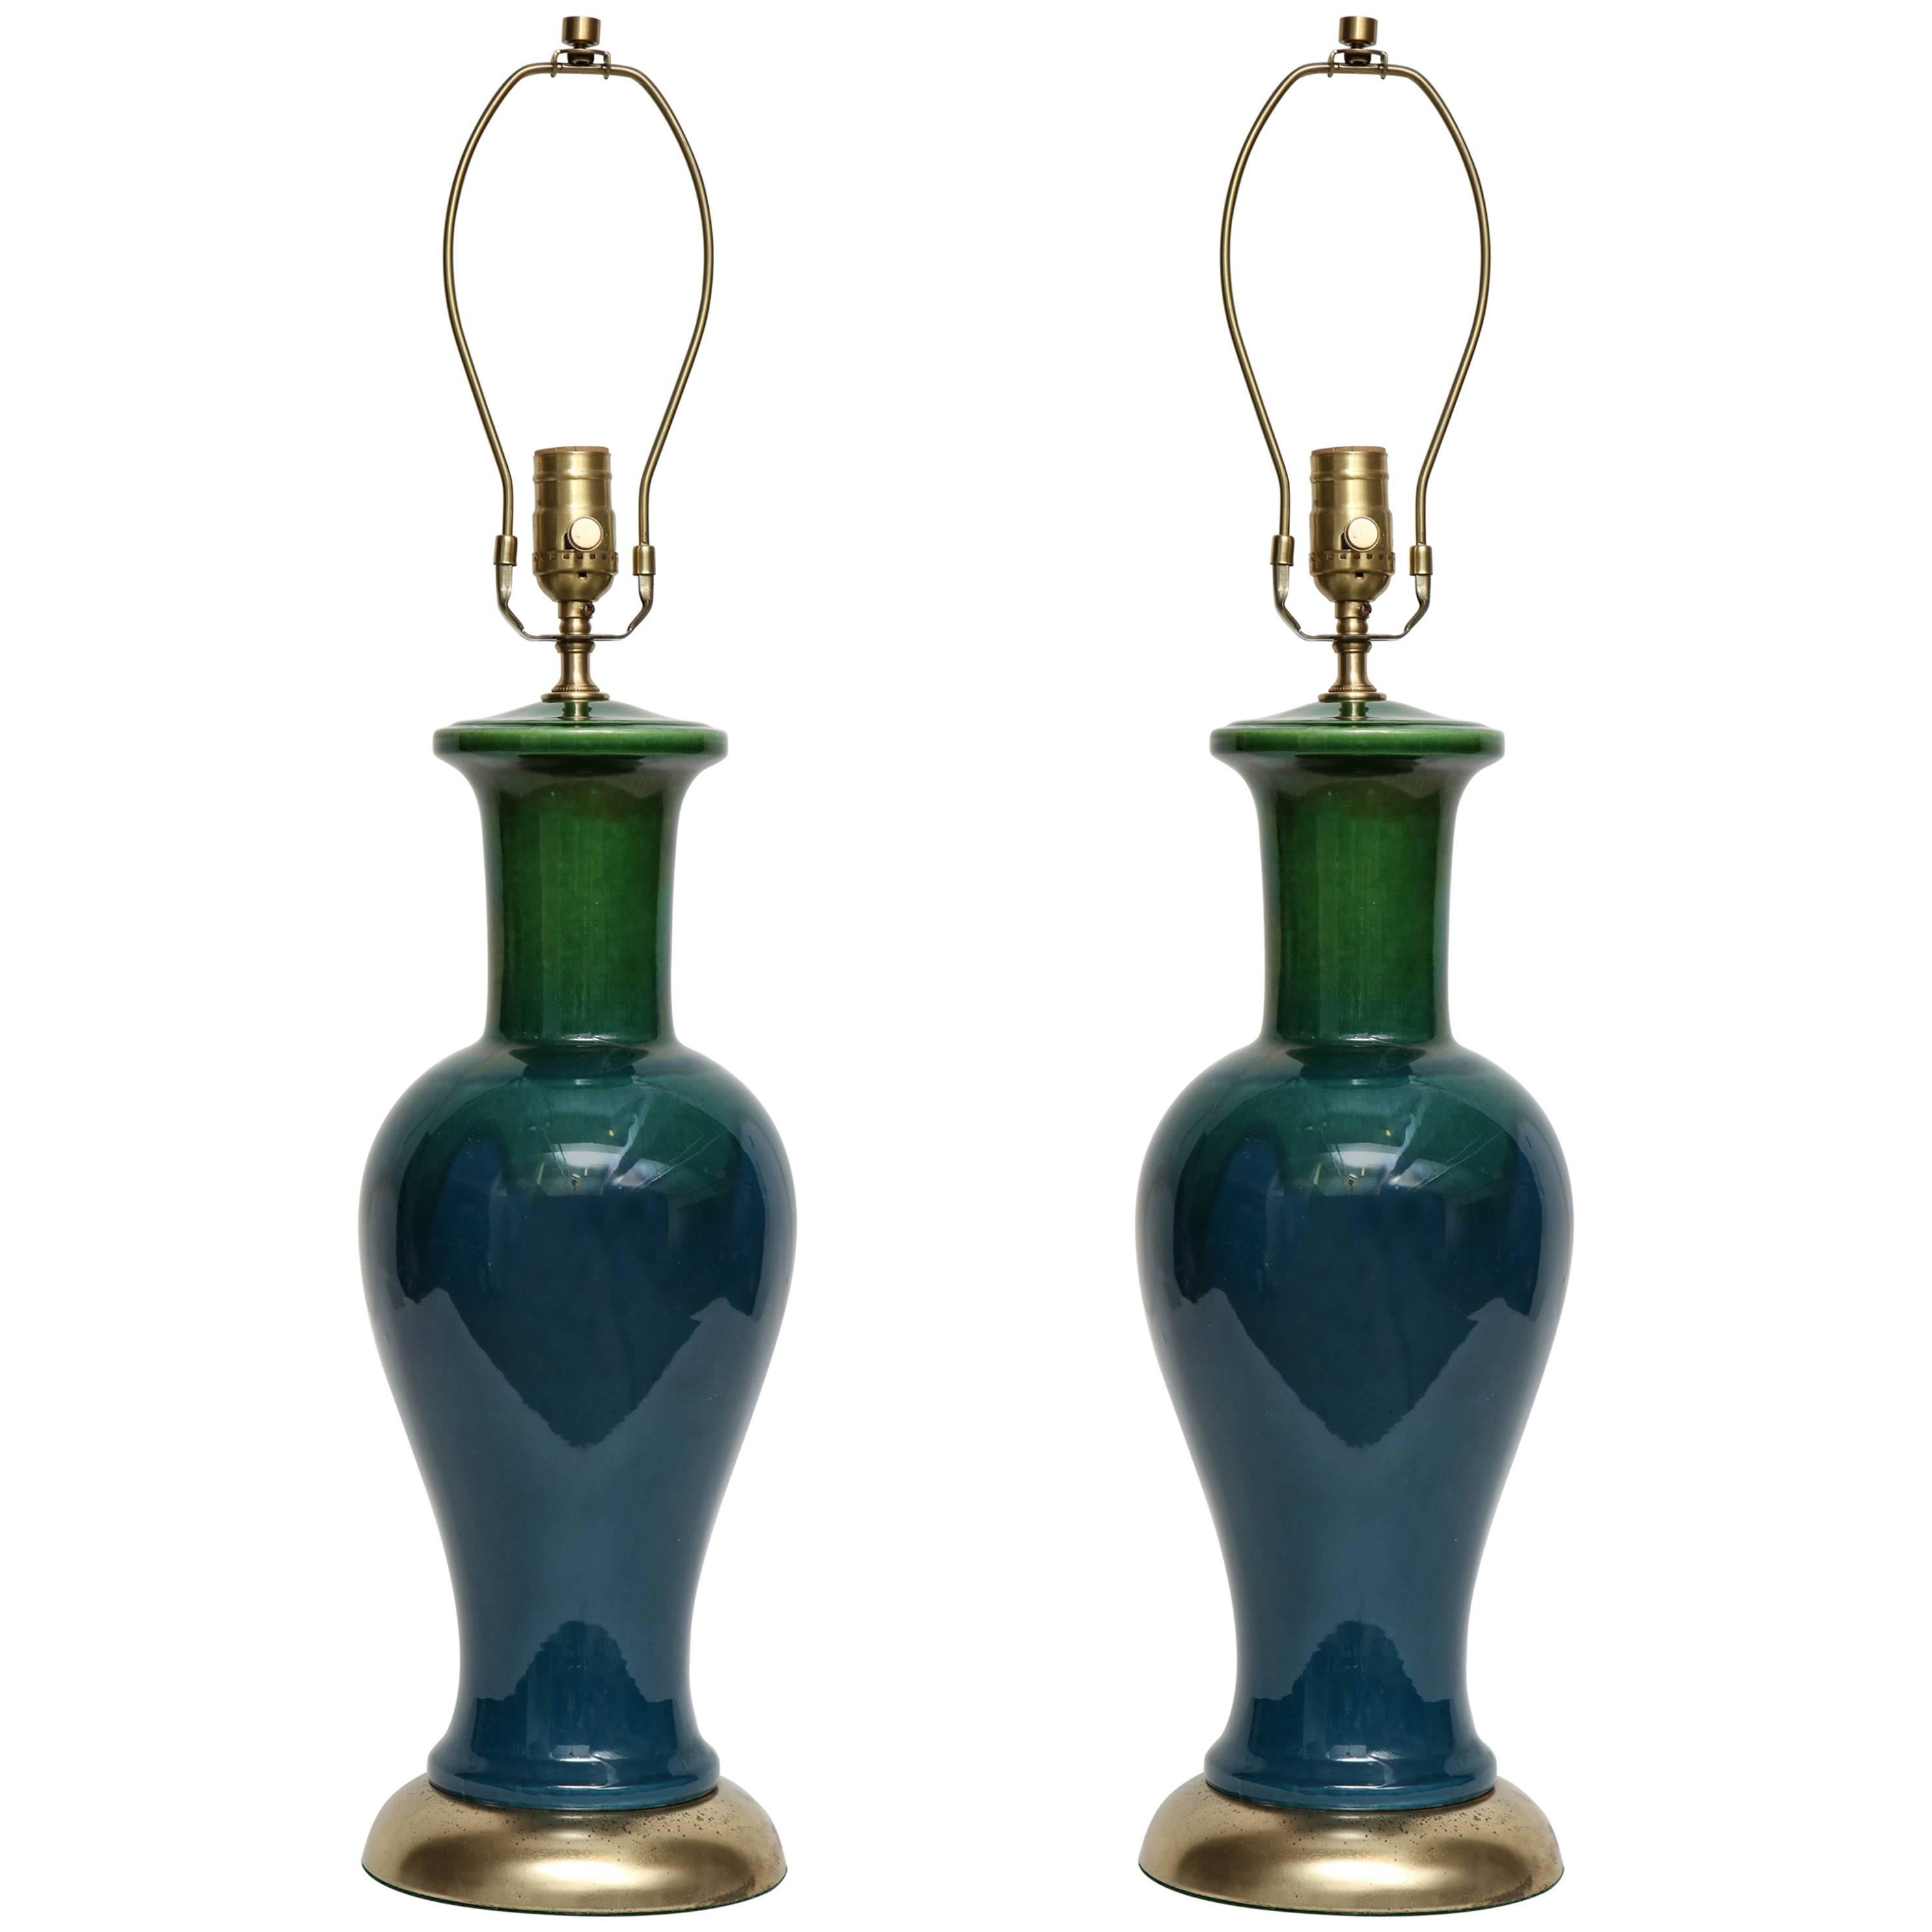 Blue/Green Ombre Glazed Lamps